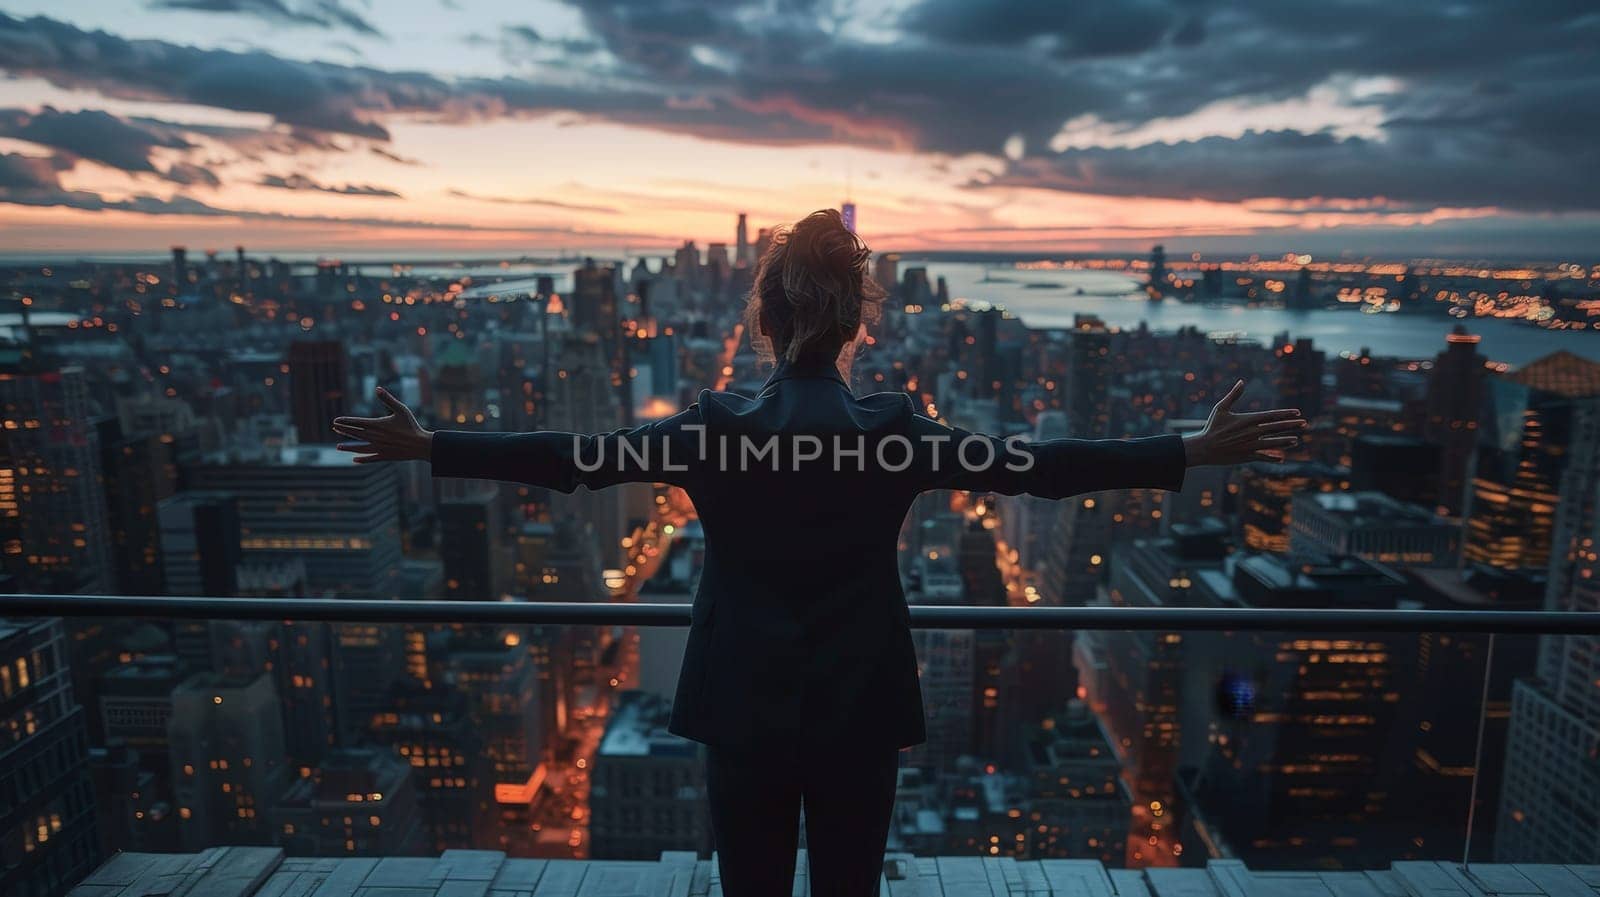 A businesswoman stands arms outstretched with embracing the vast cityscape below, Freedom woman.